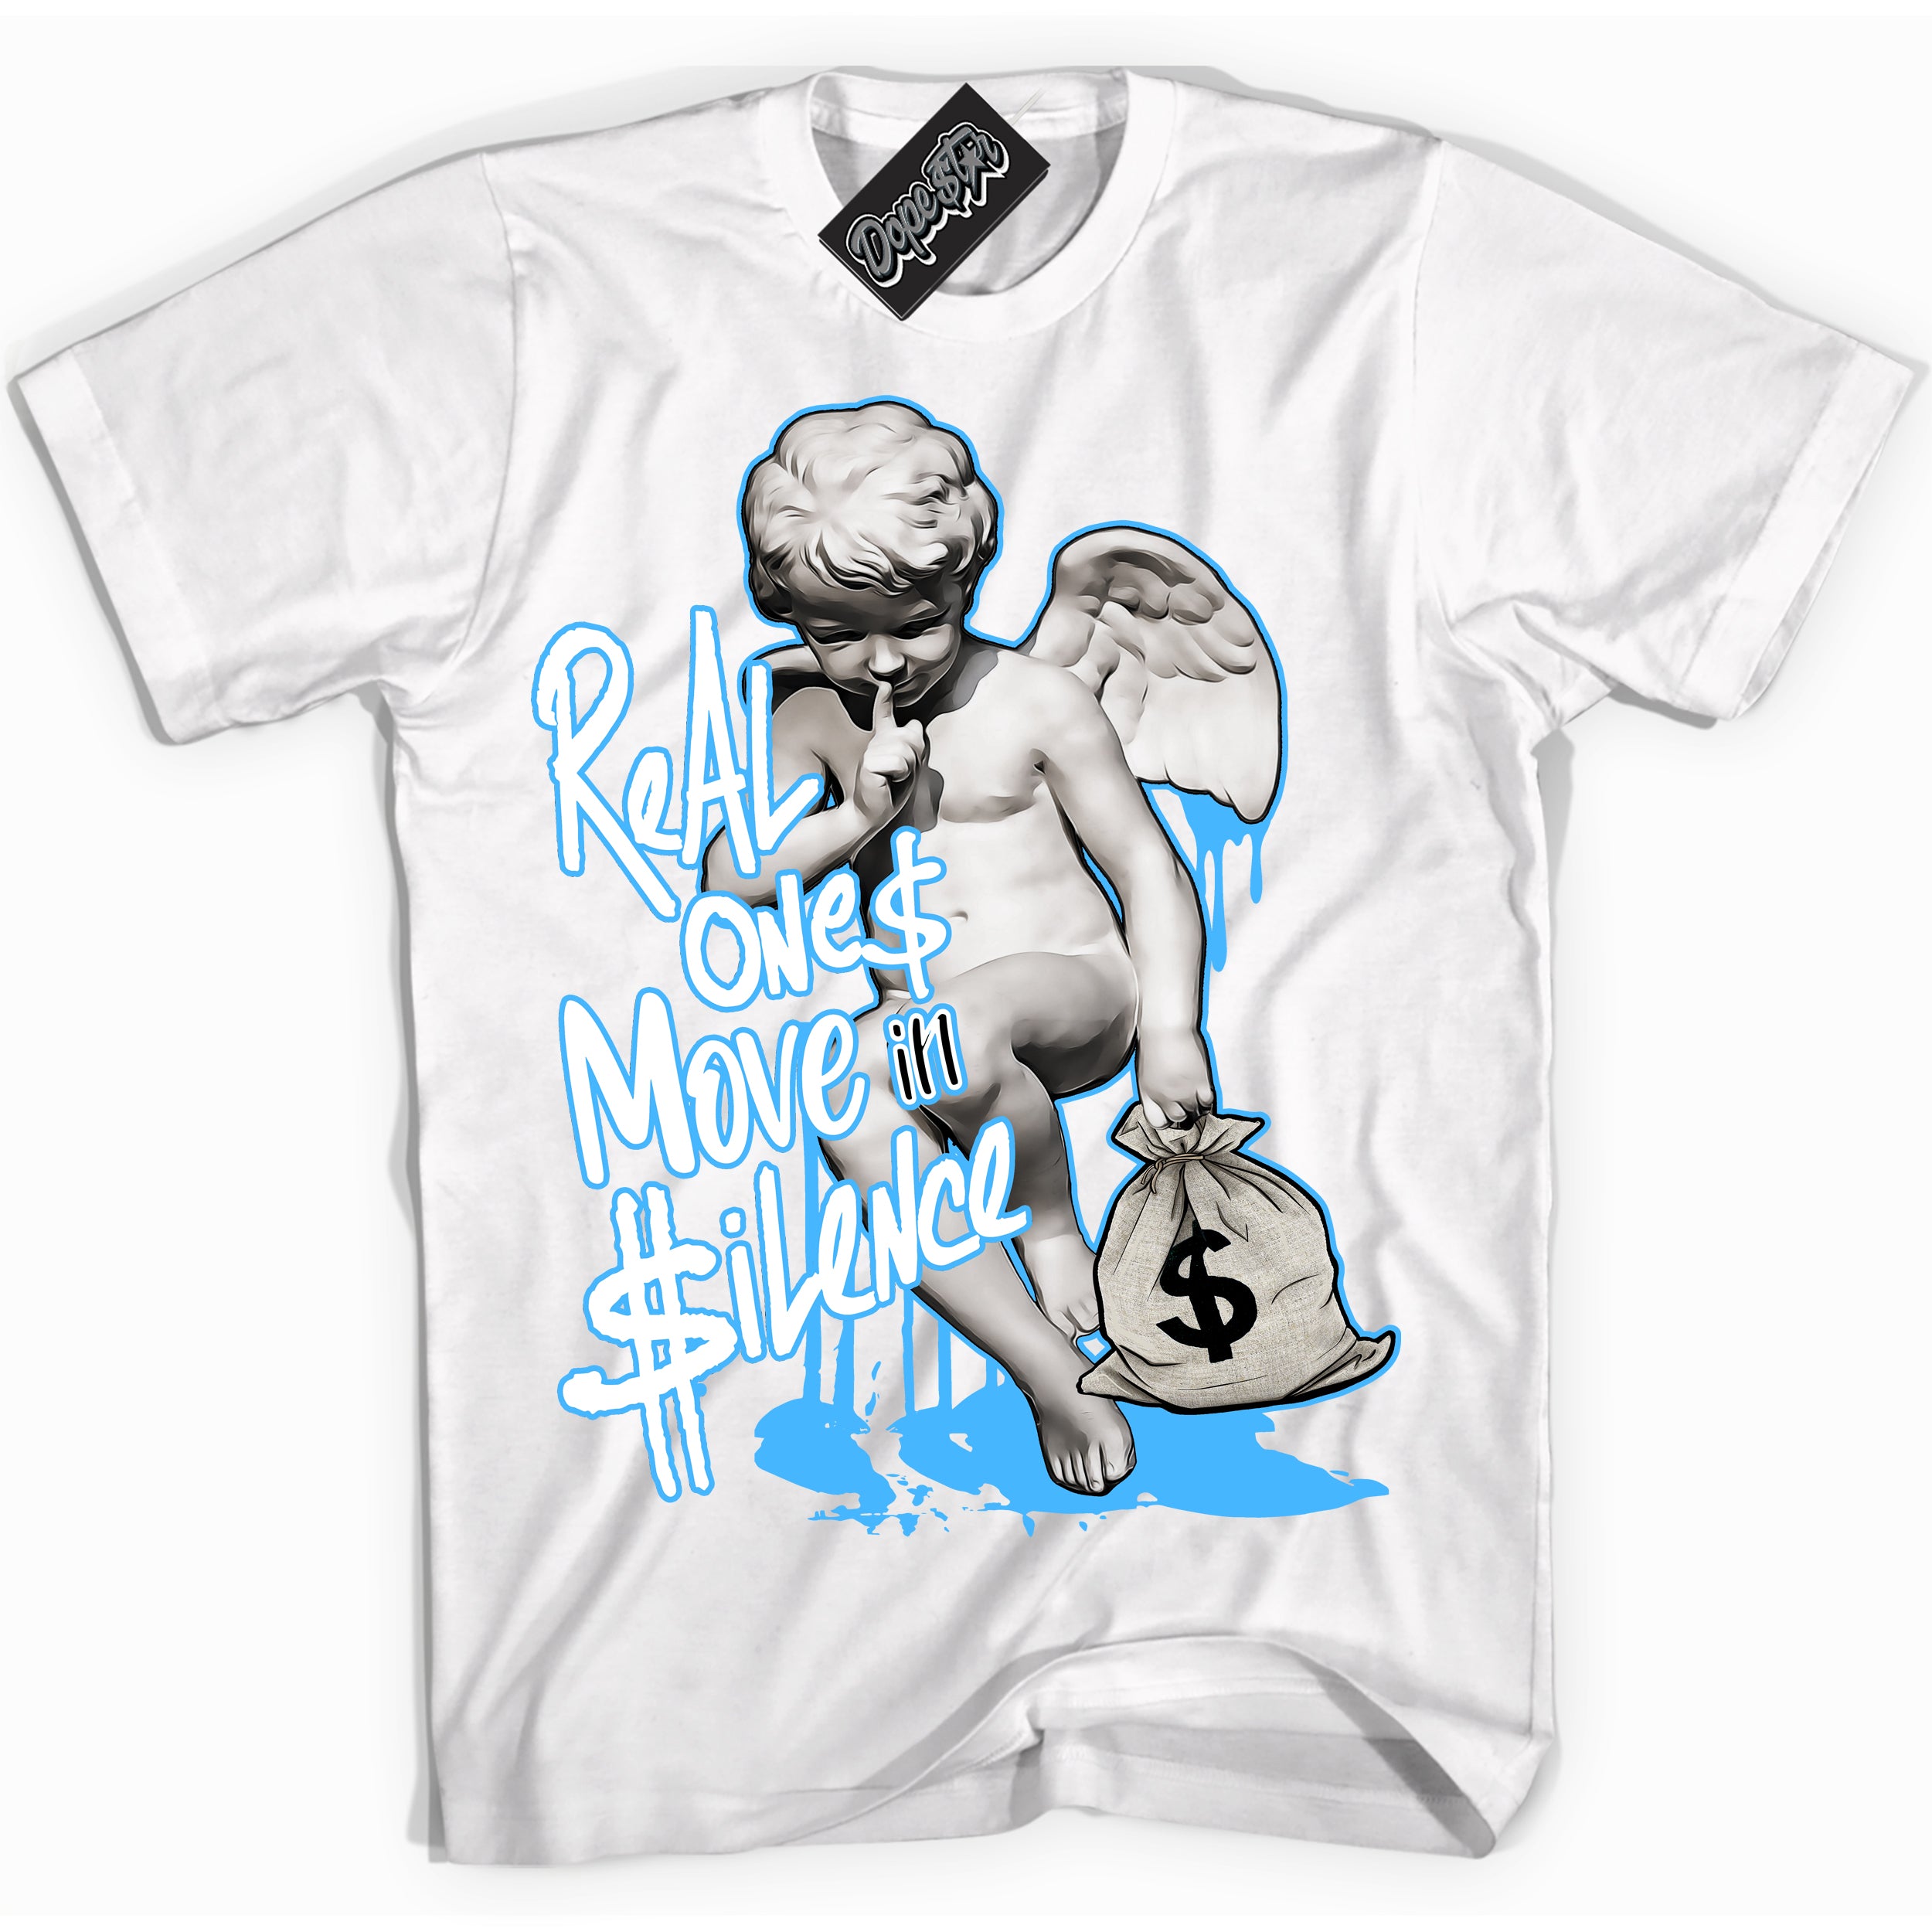 Cool White graphic tee with “ Real Ones Cherub ” design, that perfectly matches Powder Blue 9s sneakers 